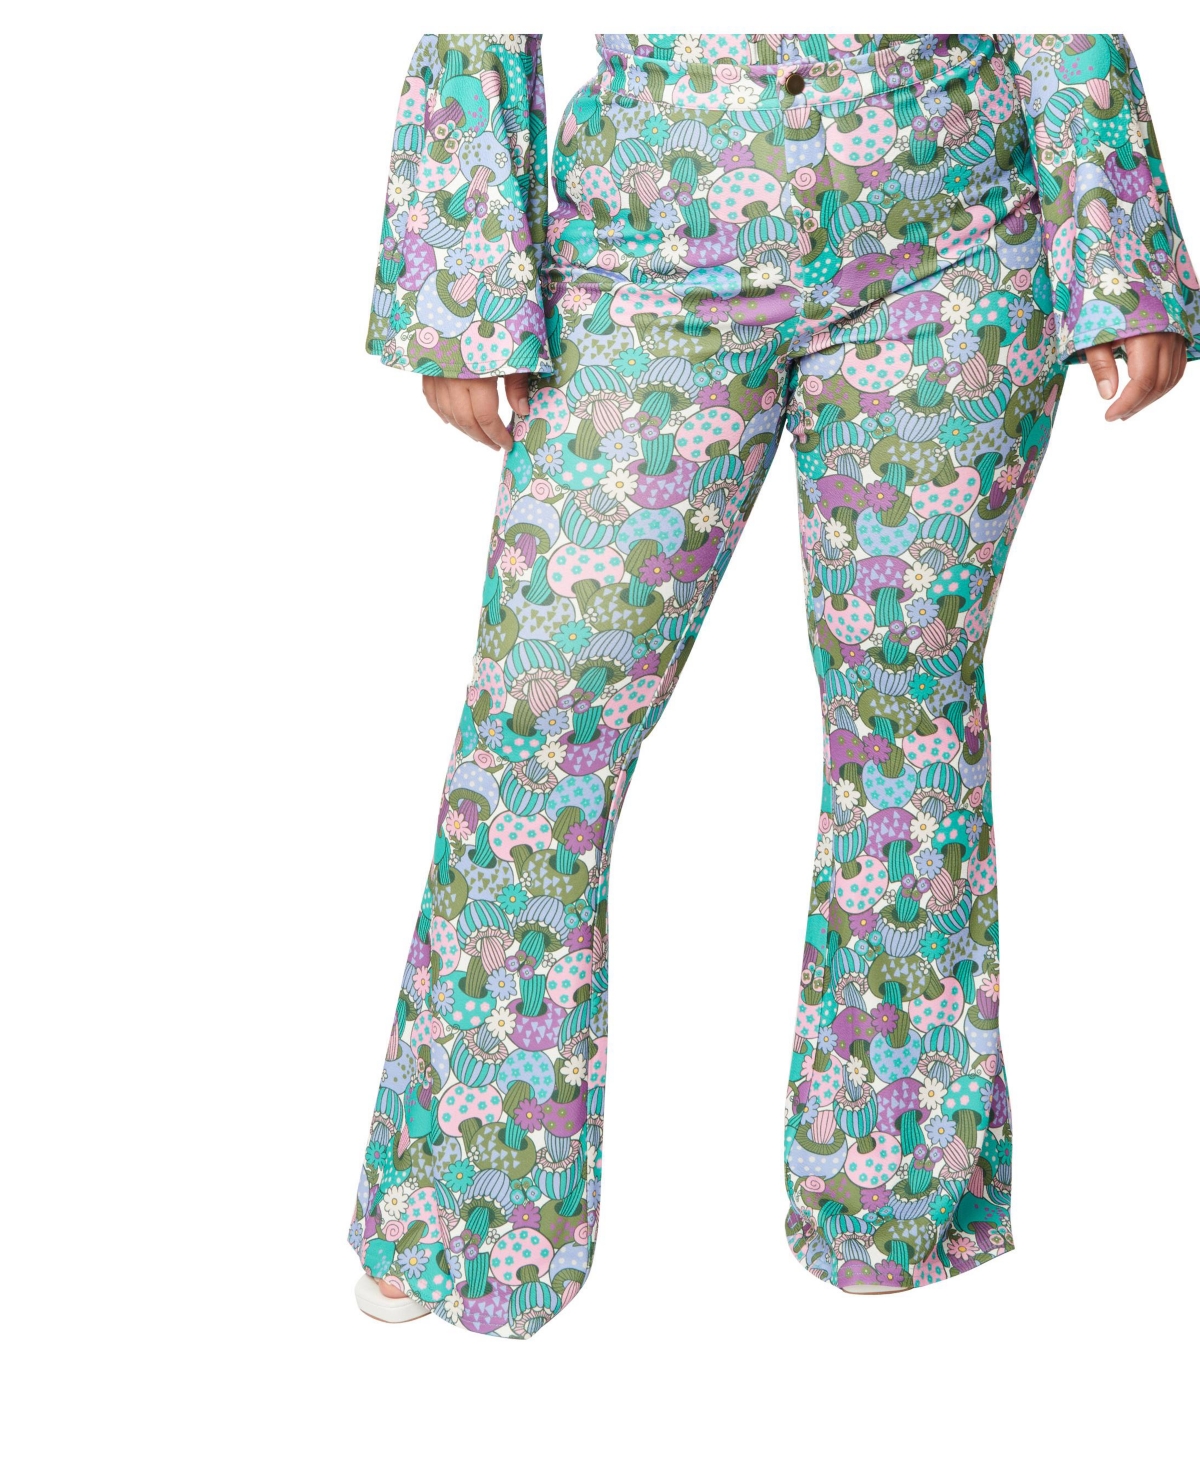 Plus Size Zipper Fly High Rise Find Your Flare Knit Pants - Teal/groovy mushrooms